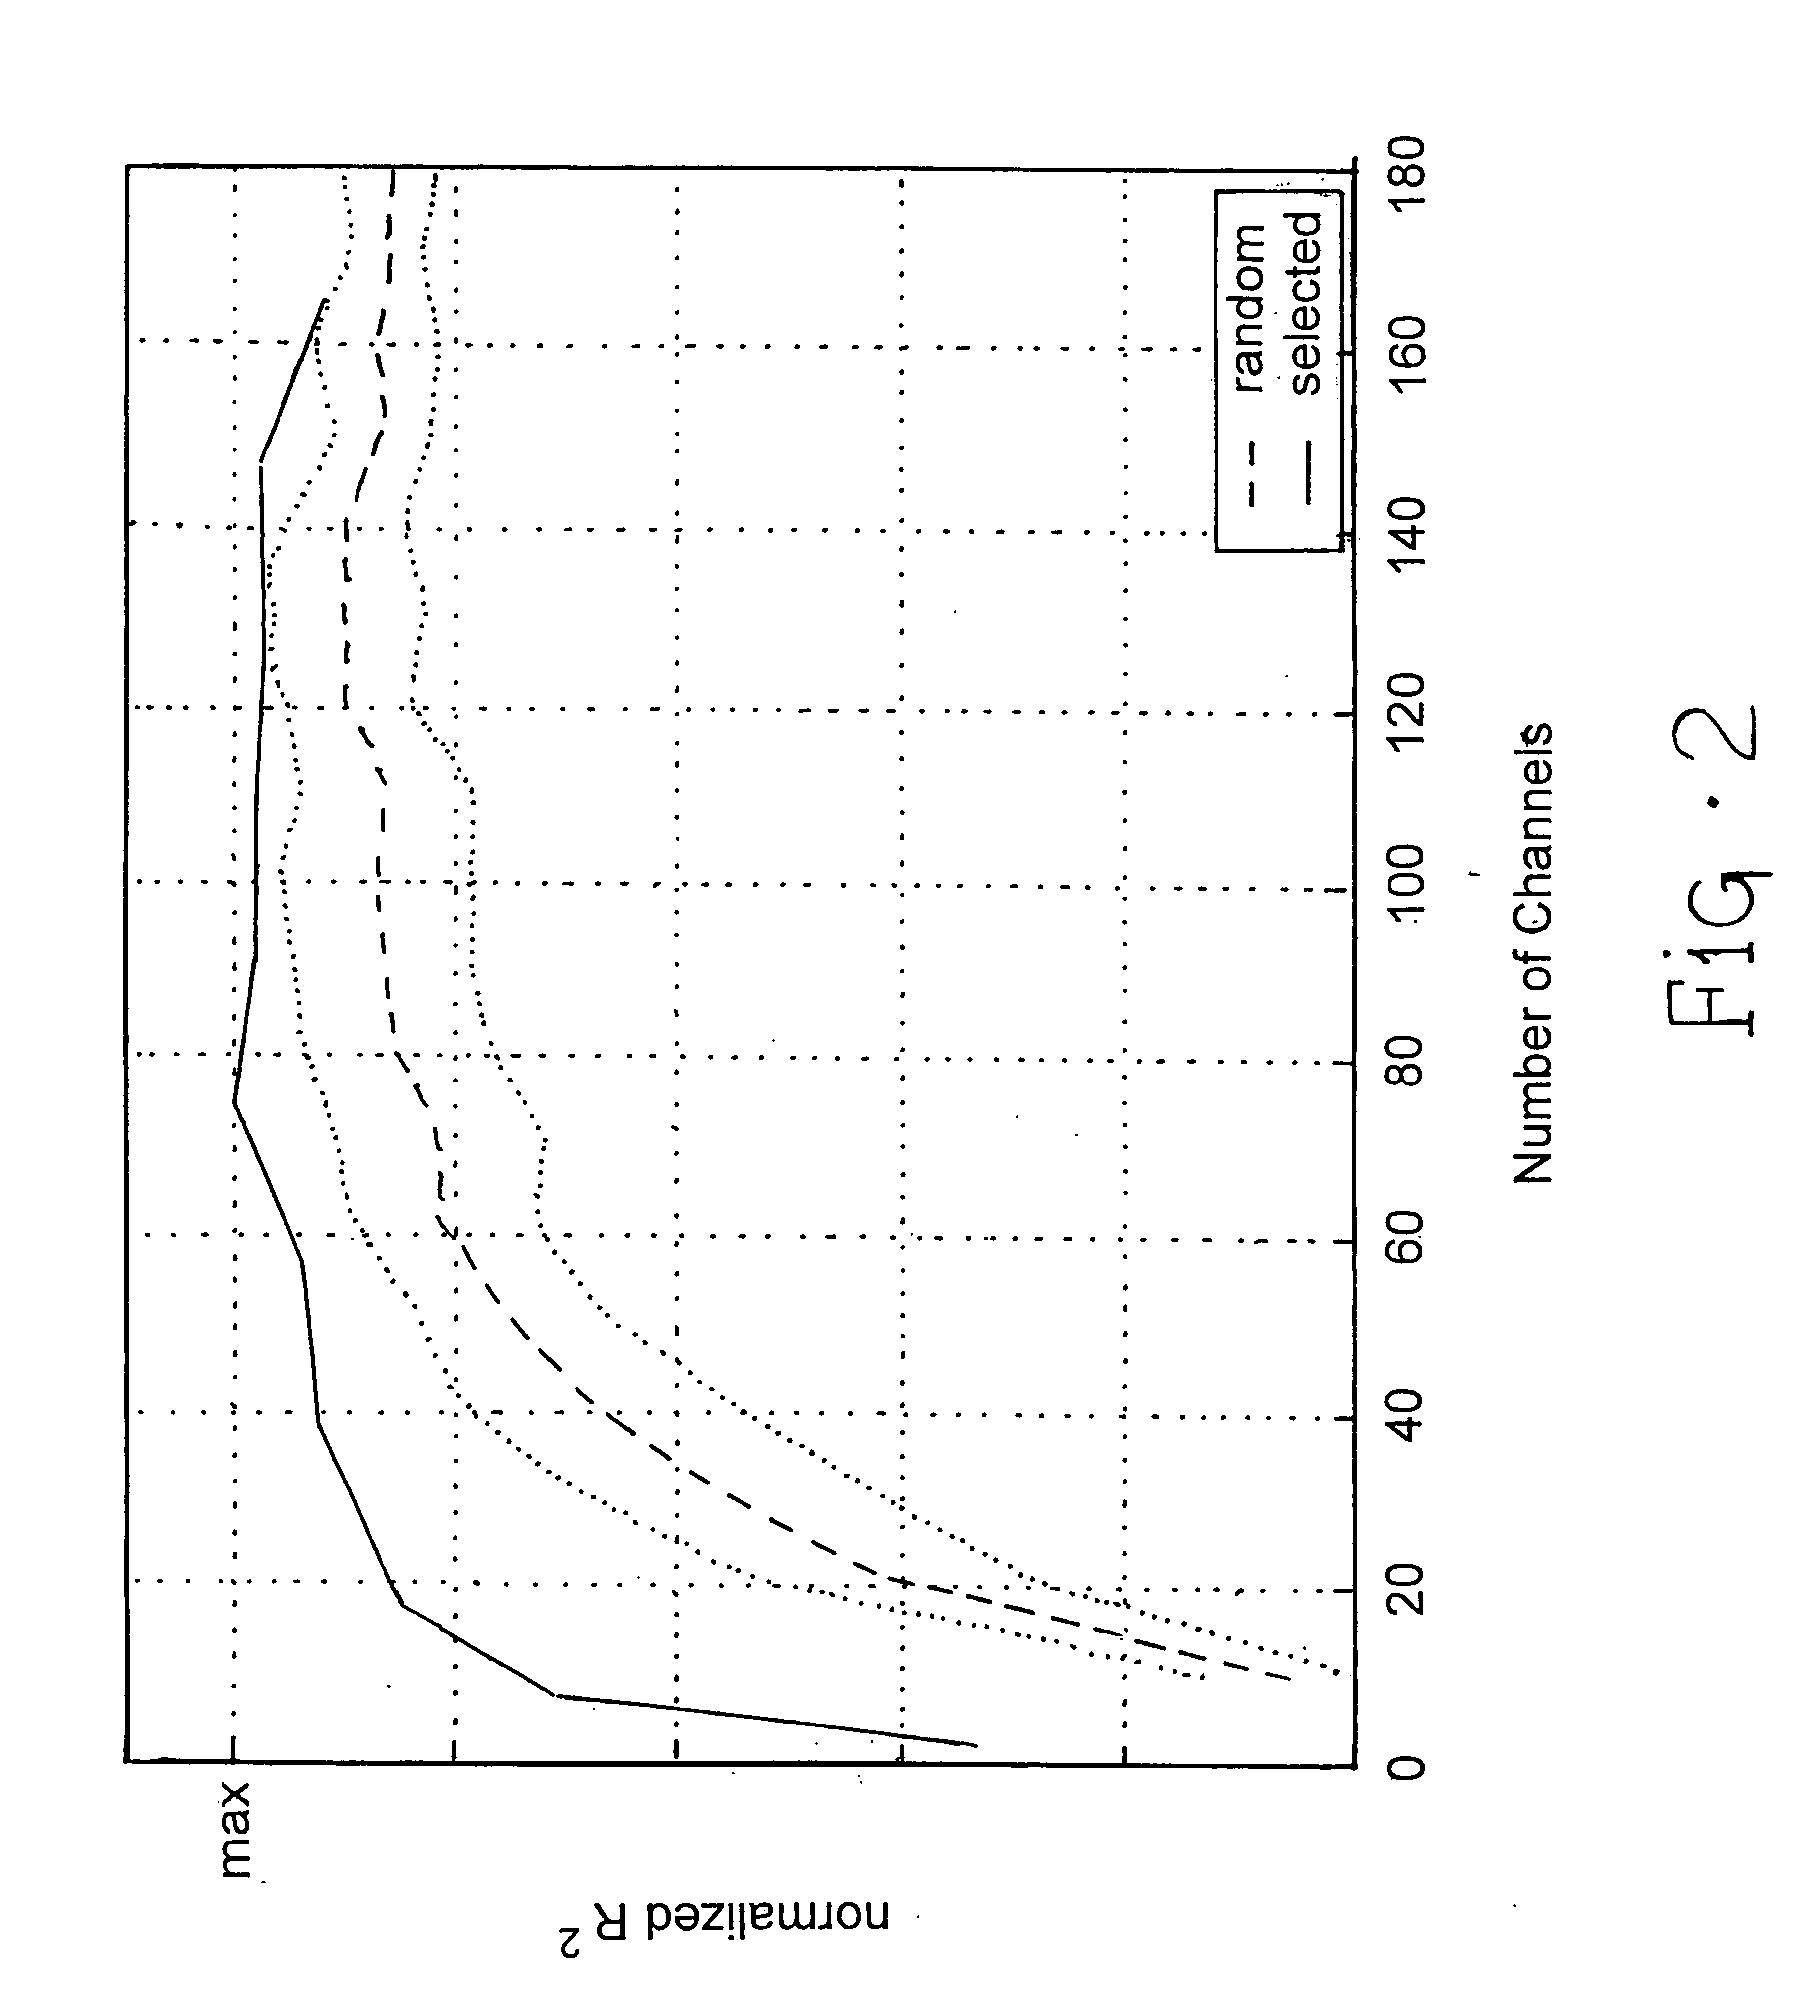 Methods, systems, and computer program products for neural channel selection in a multi-channel system